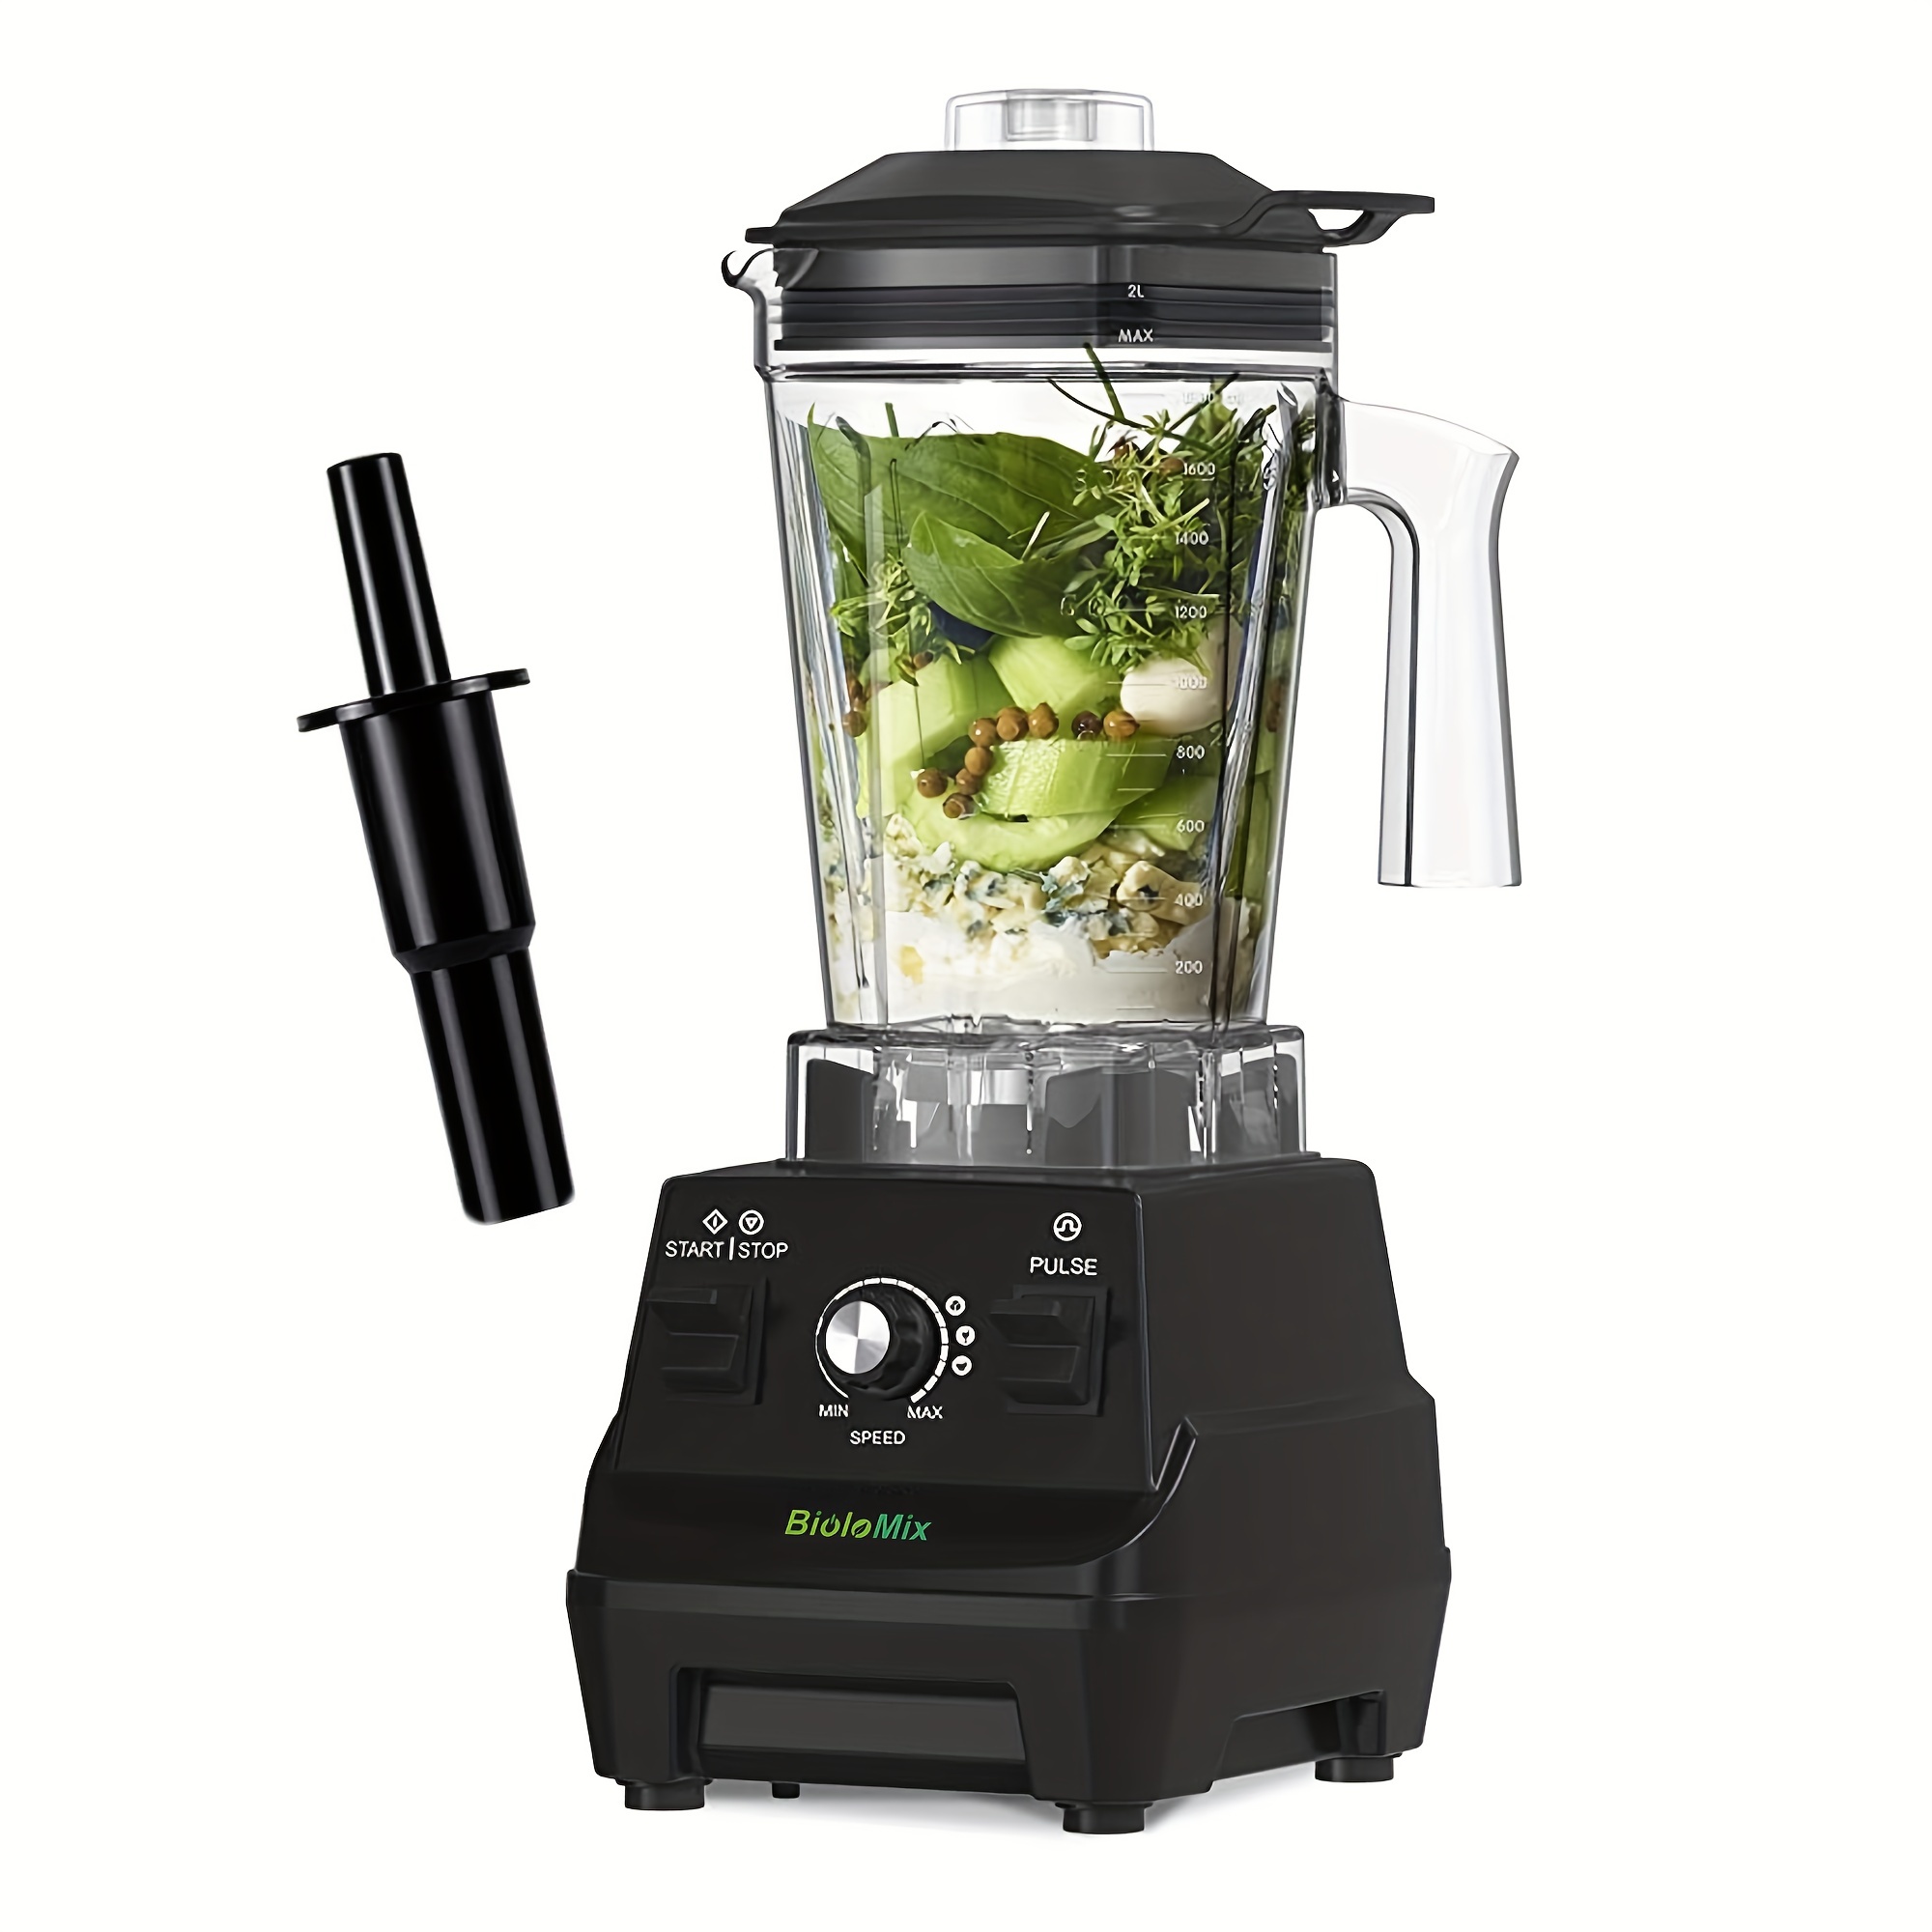 3 in 1 Turborcrush blender  BUCHYMIX BLENDER is a must have by